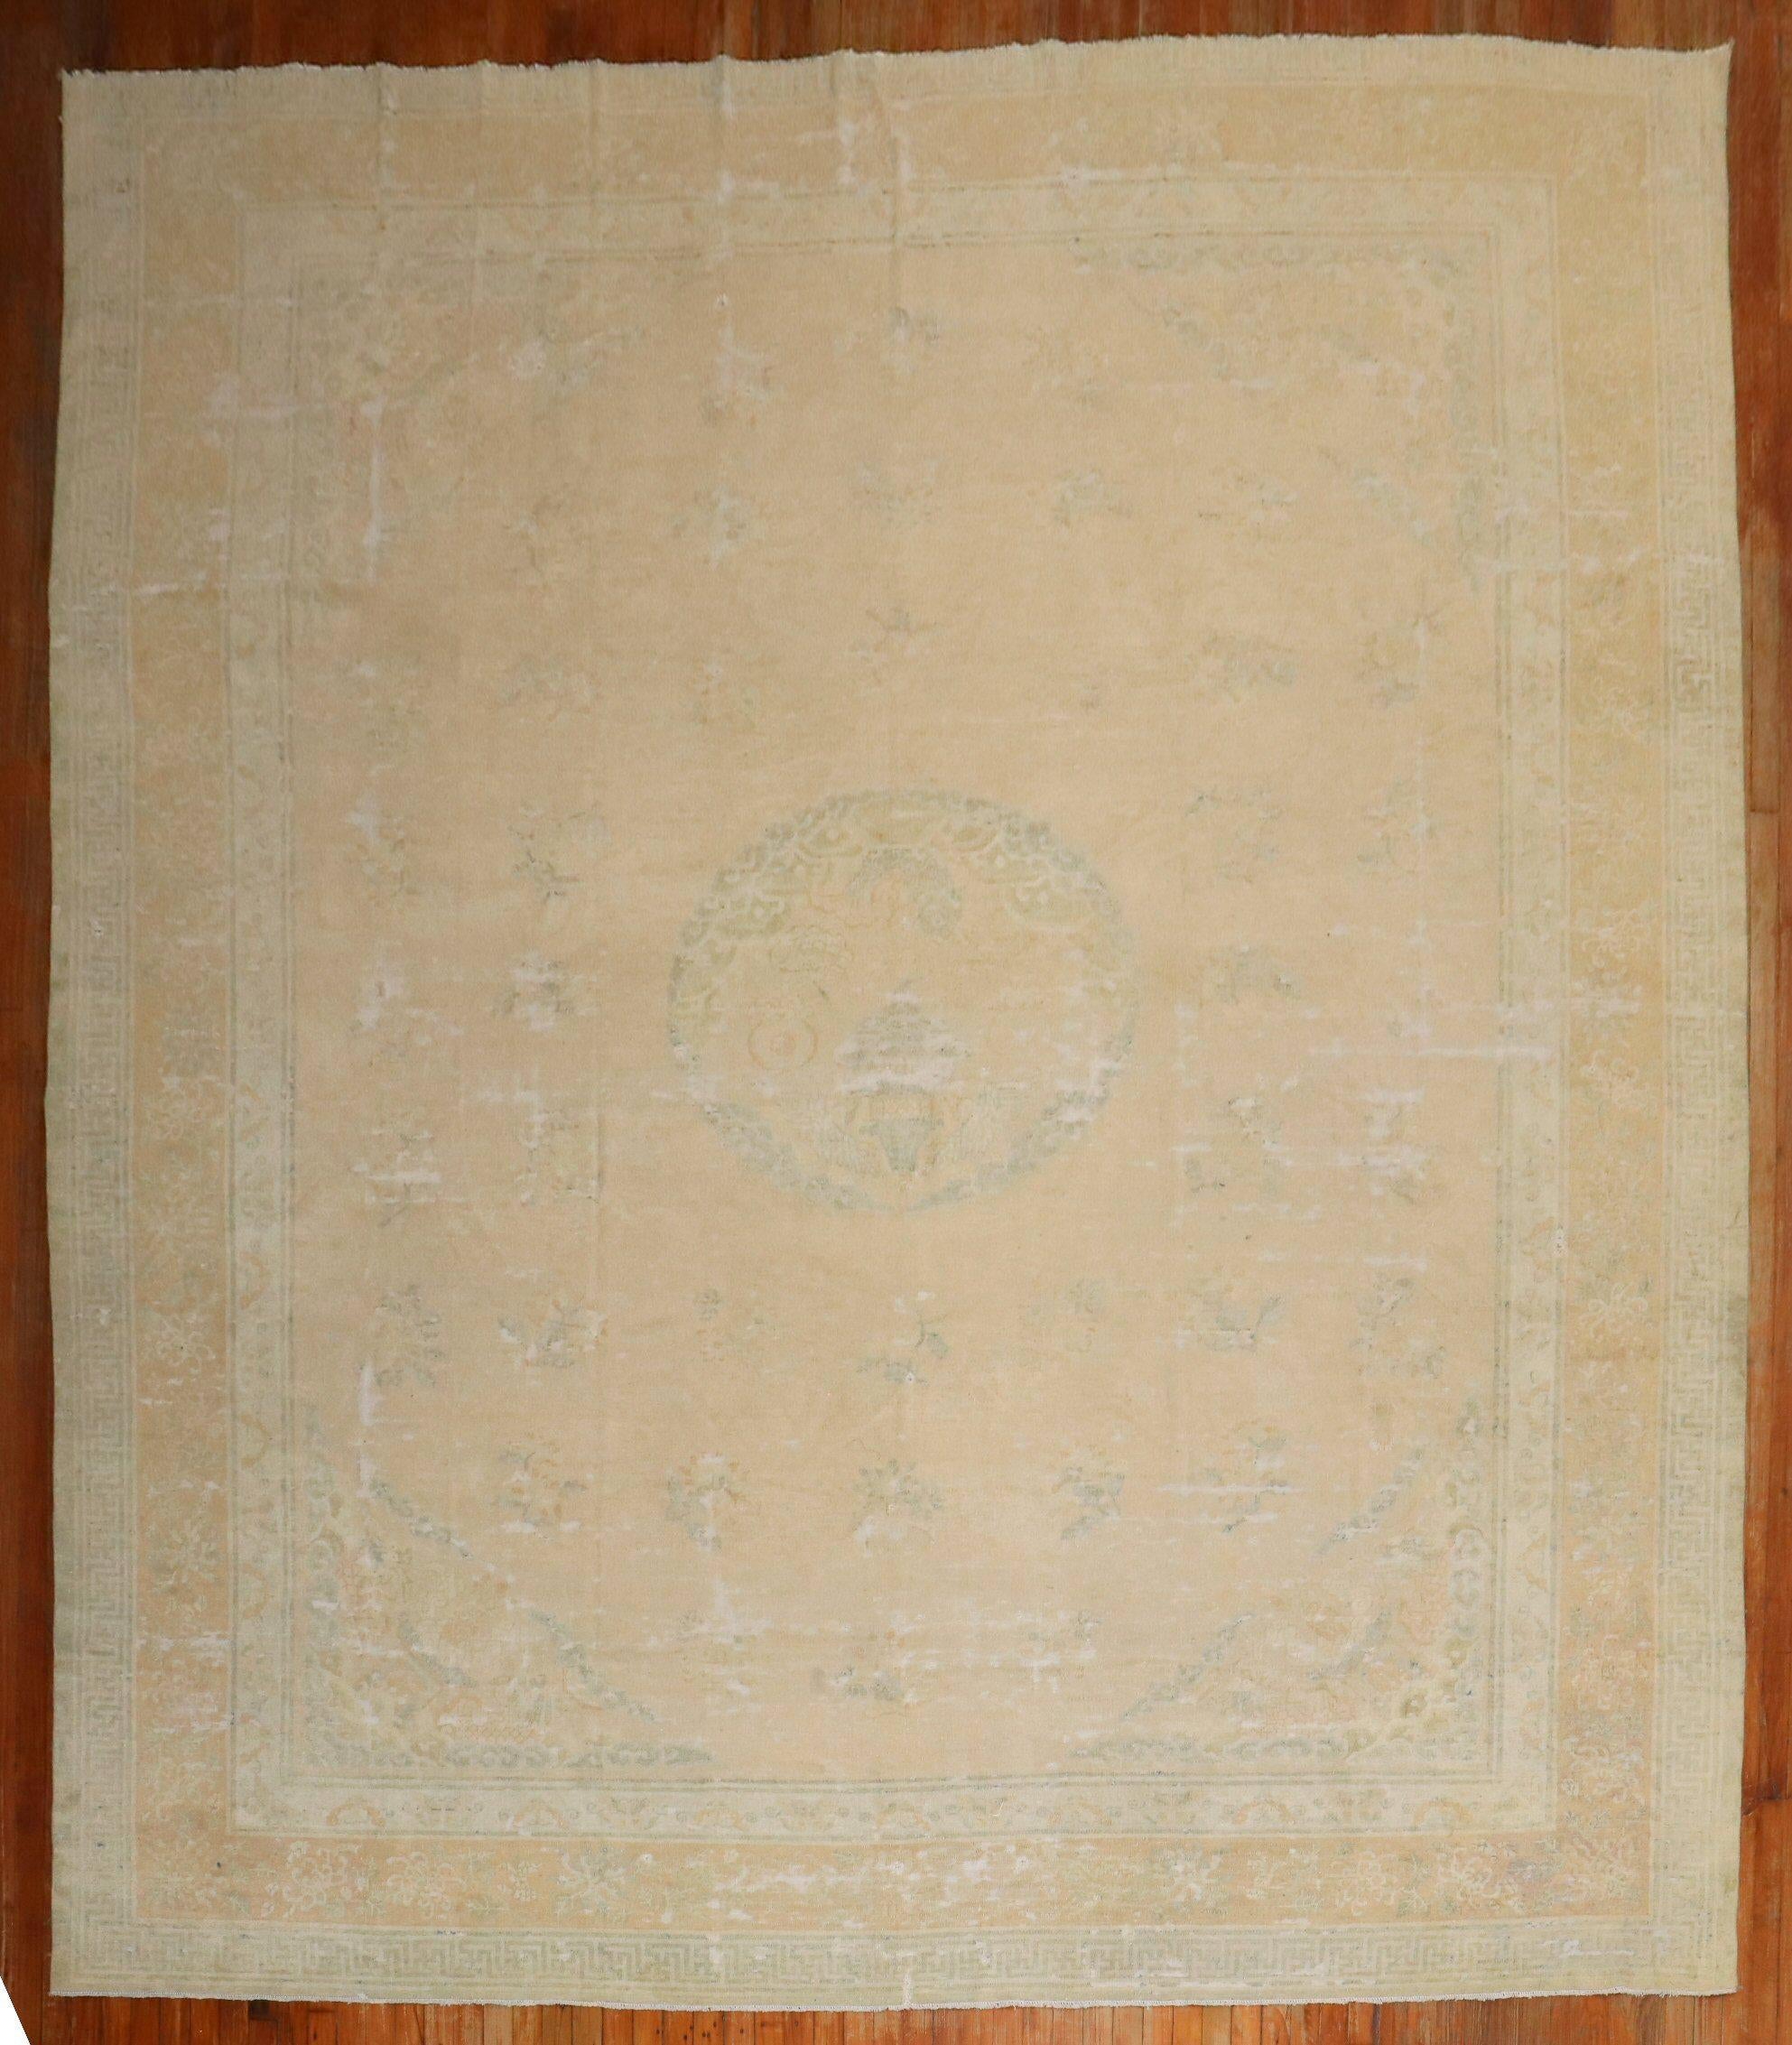 3rd quarter of the 19th century Century Worn/Distressed Chinese Large square rug in neutral colors

Measures: 10'10'' x 12'11''